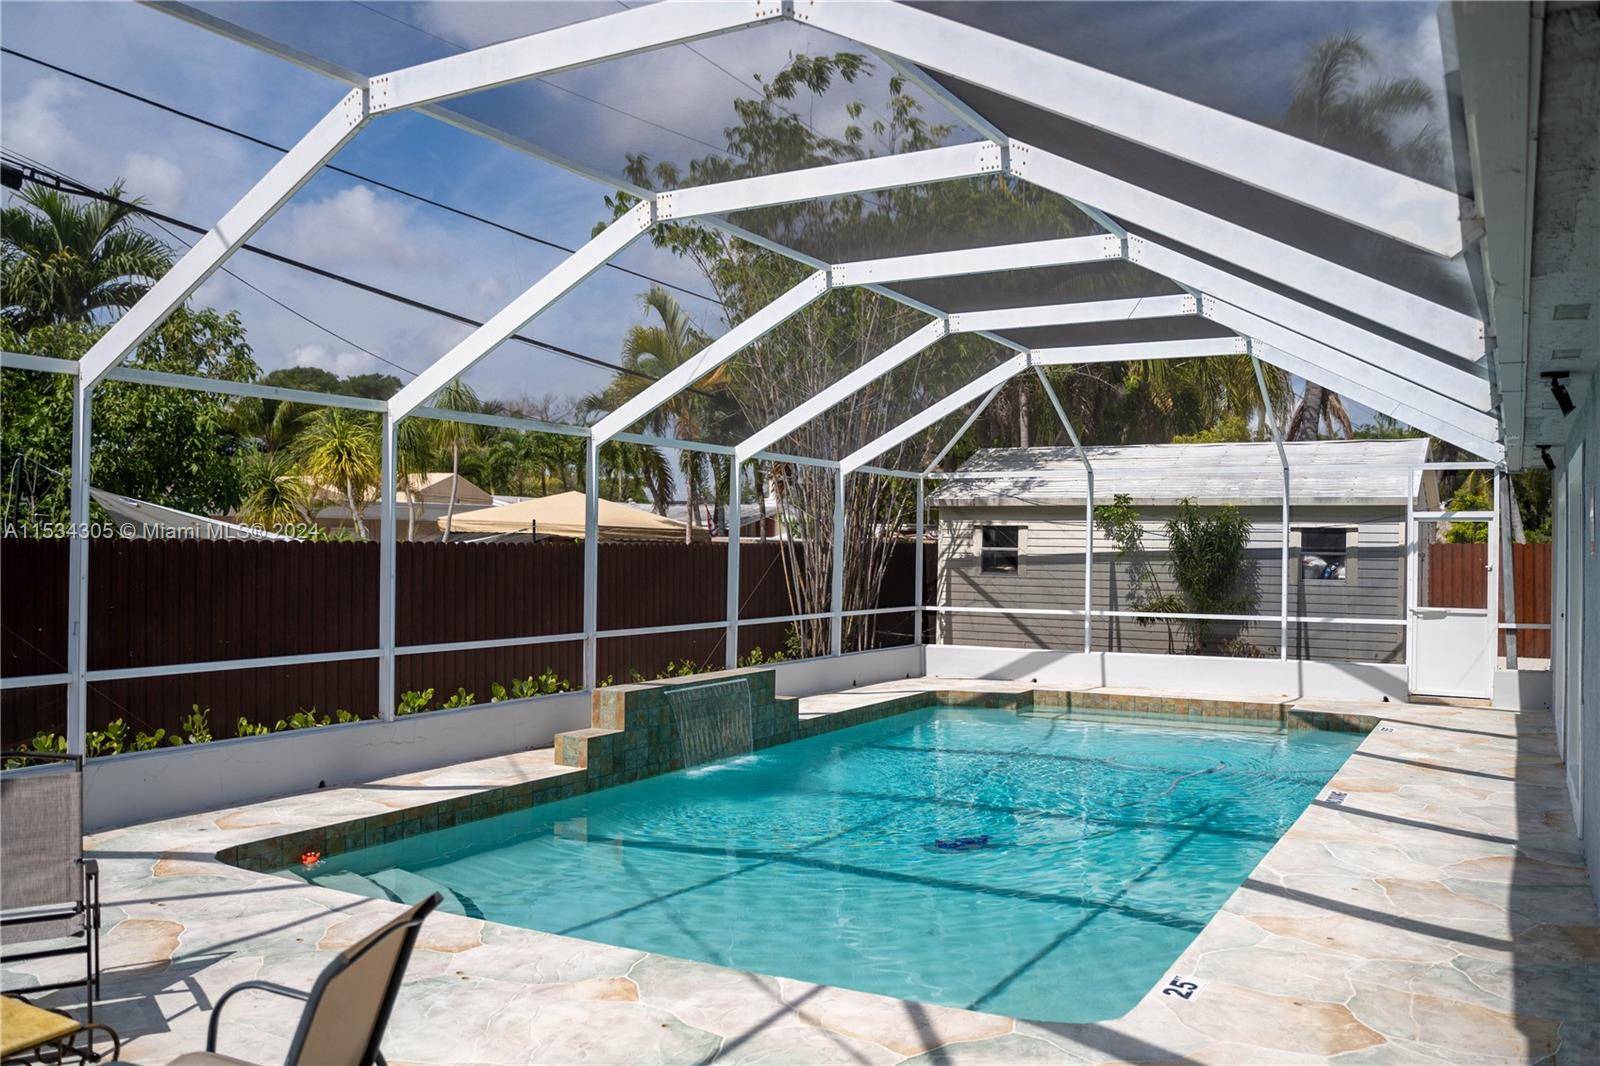 Cutler Bay Pool home. Over 2000 square feet featuring 4 bedrooms and 2 bathrooms spacious bedrooms split plan.